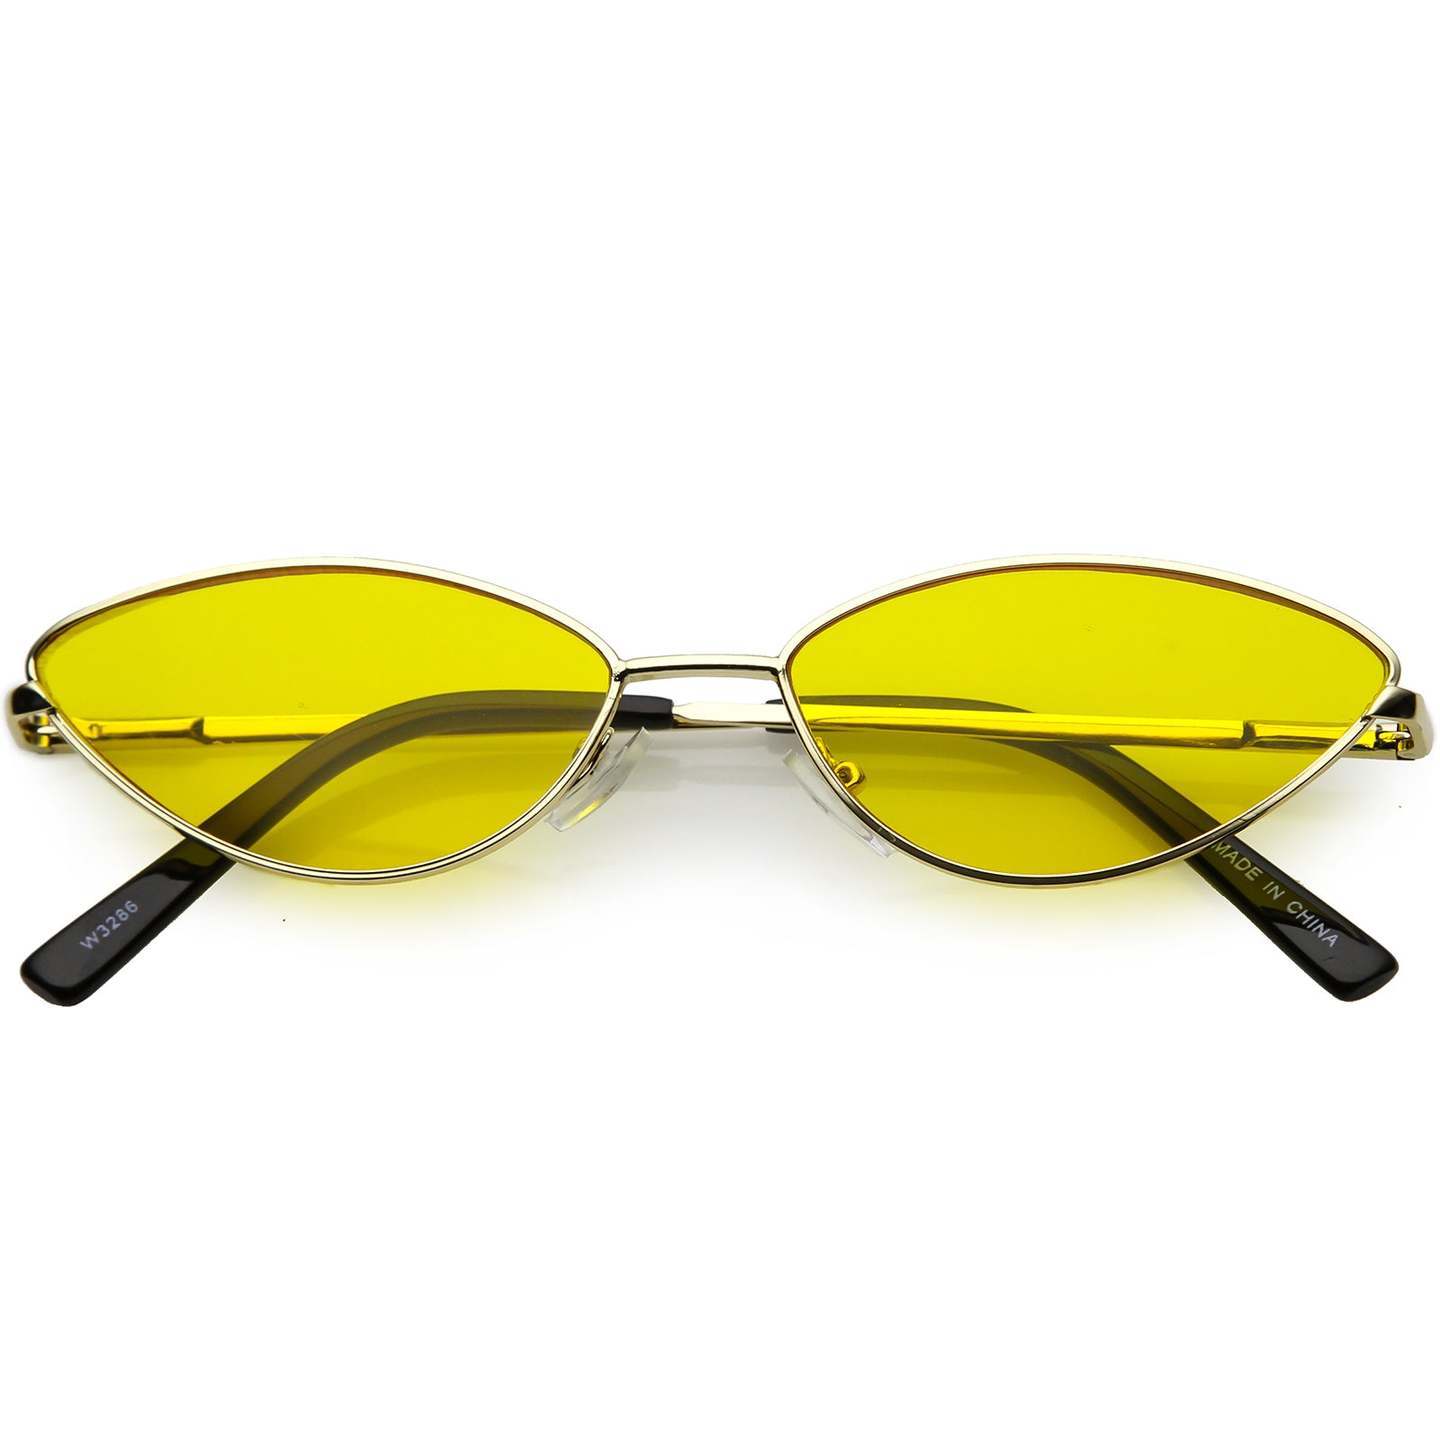 RETRO SMALL METAL CAT EYE SUNGLASSES FOR WOMEN YELLOW COLOR TINTED LENS